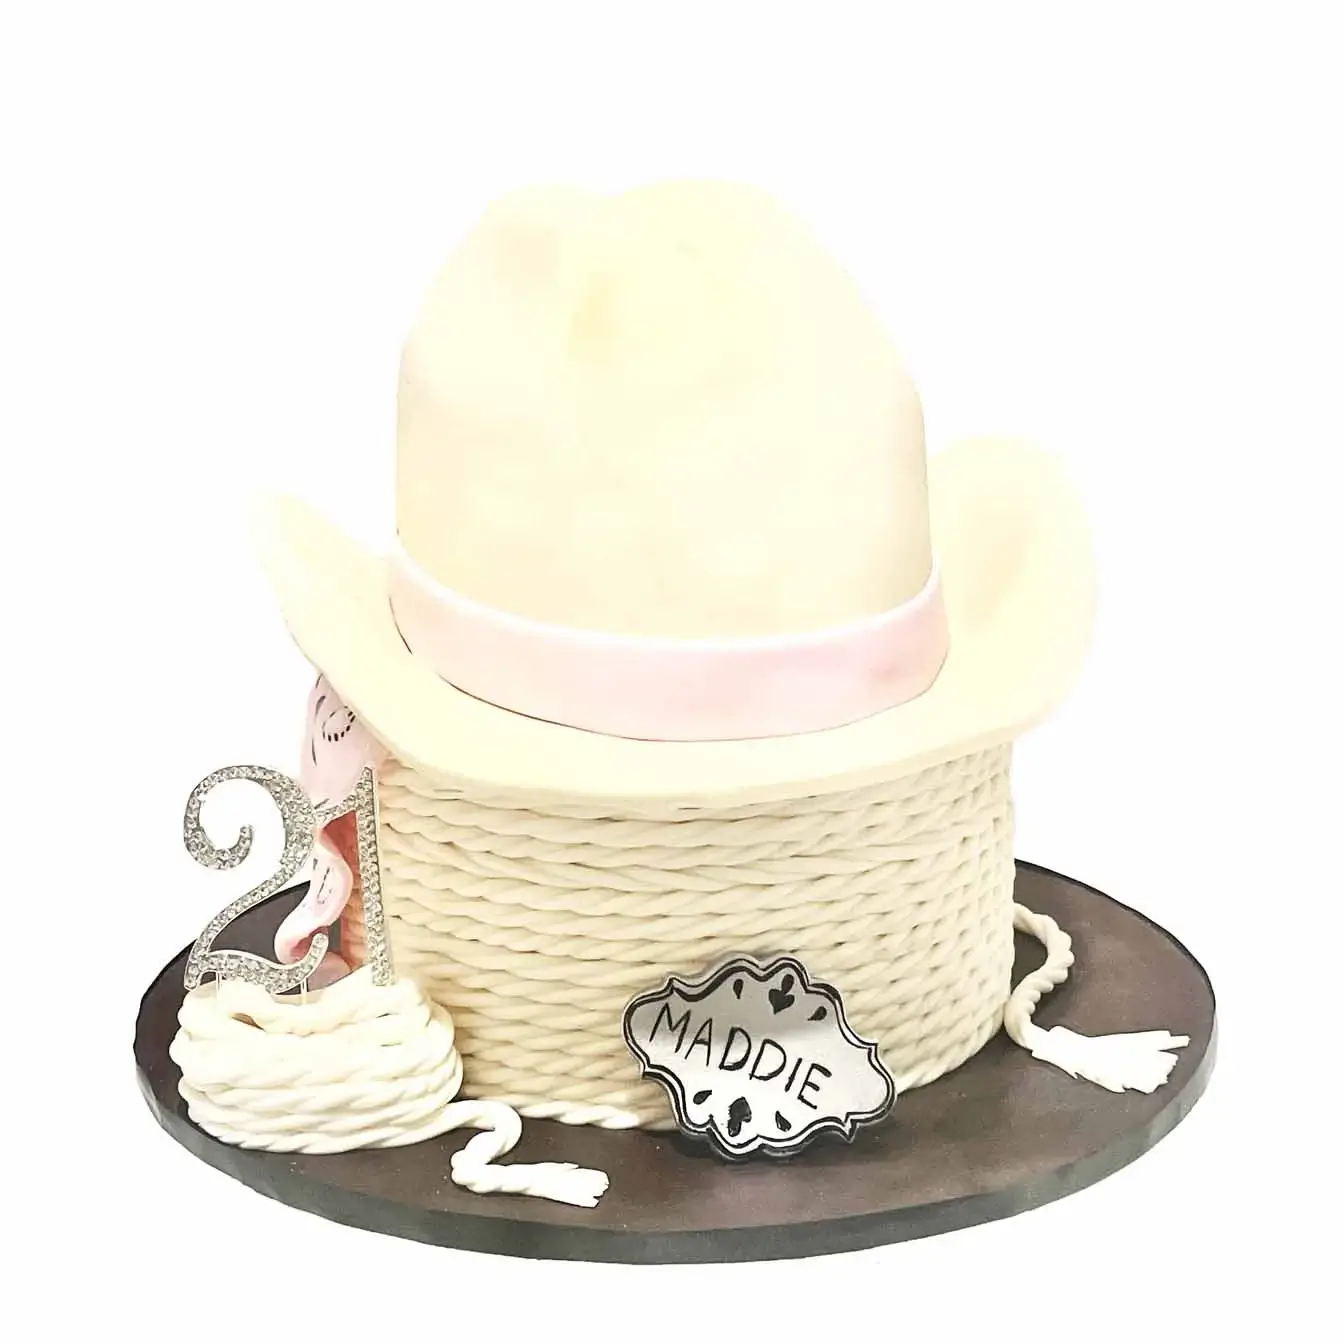 Cowgirl Elegance Cake - A cake with a bottom tier tied with rope and a cowgirl hat on top, a charming centerpiece for celebrations with a touch of western flair.